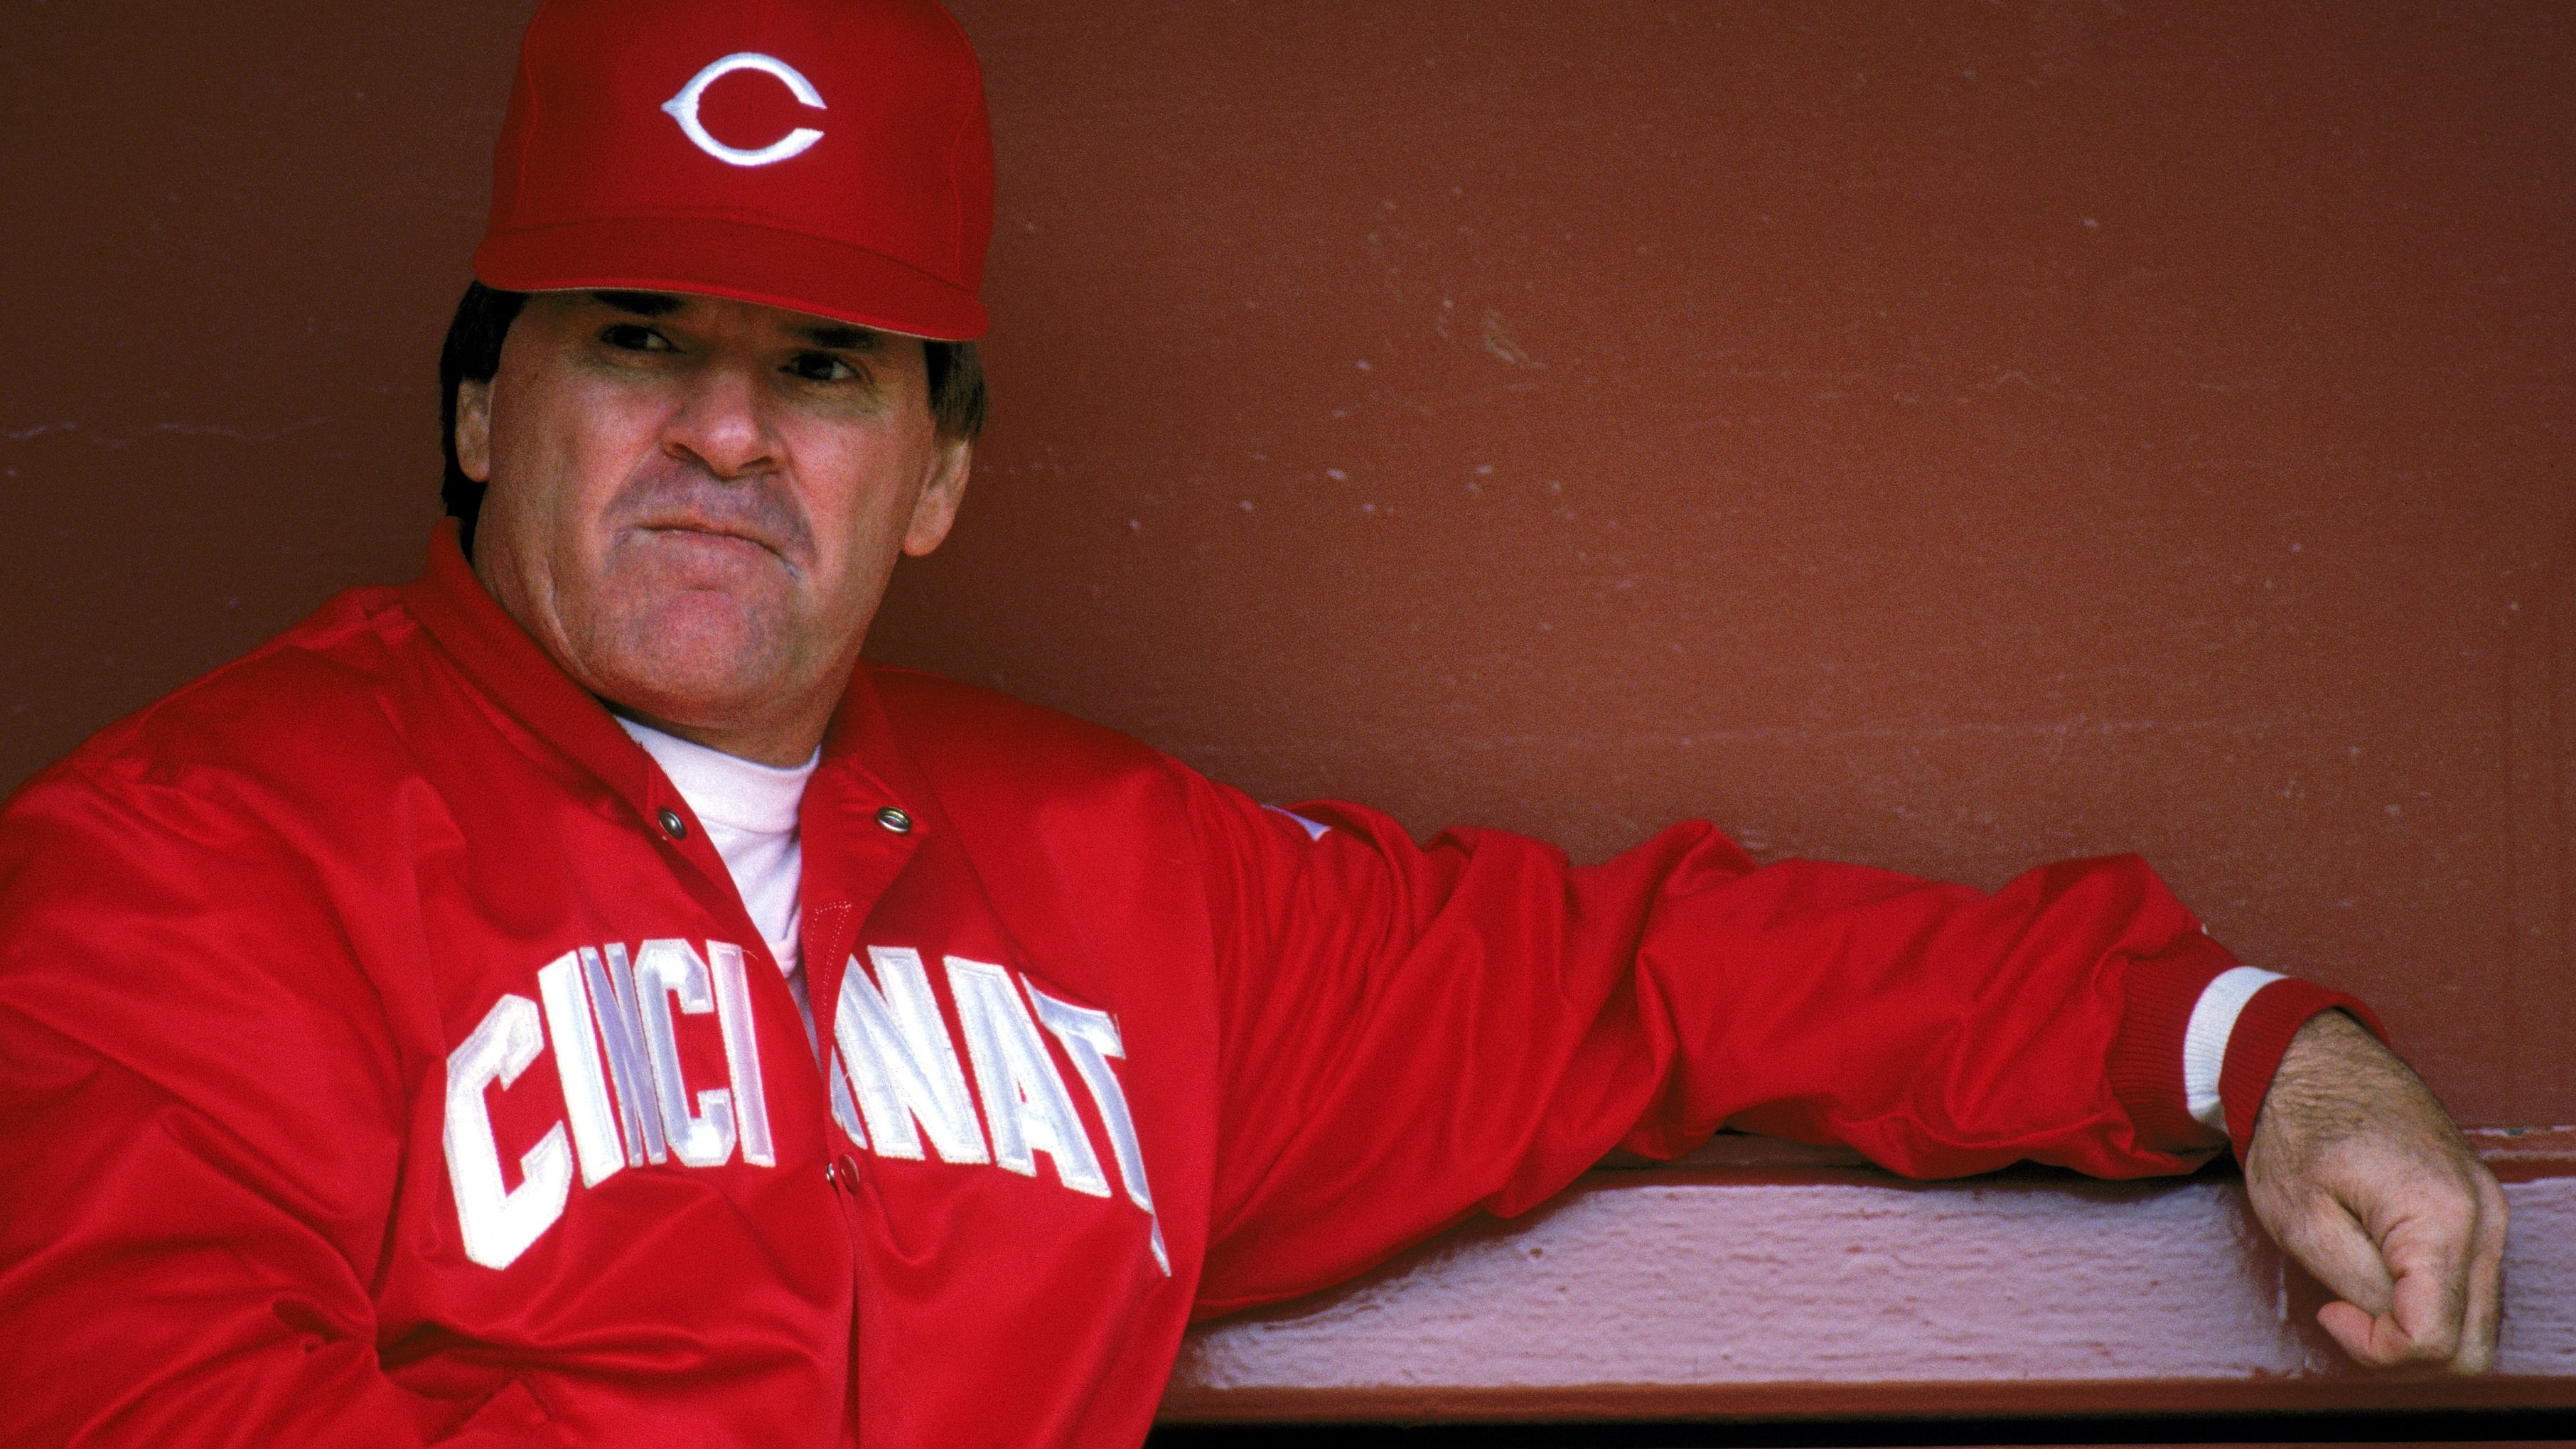 Former professional baseball player and Cincinnati Reds manager